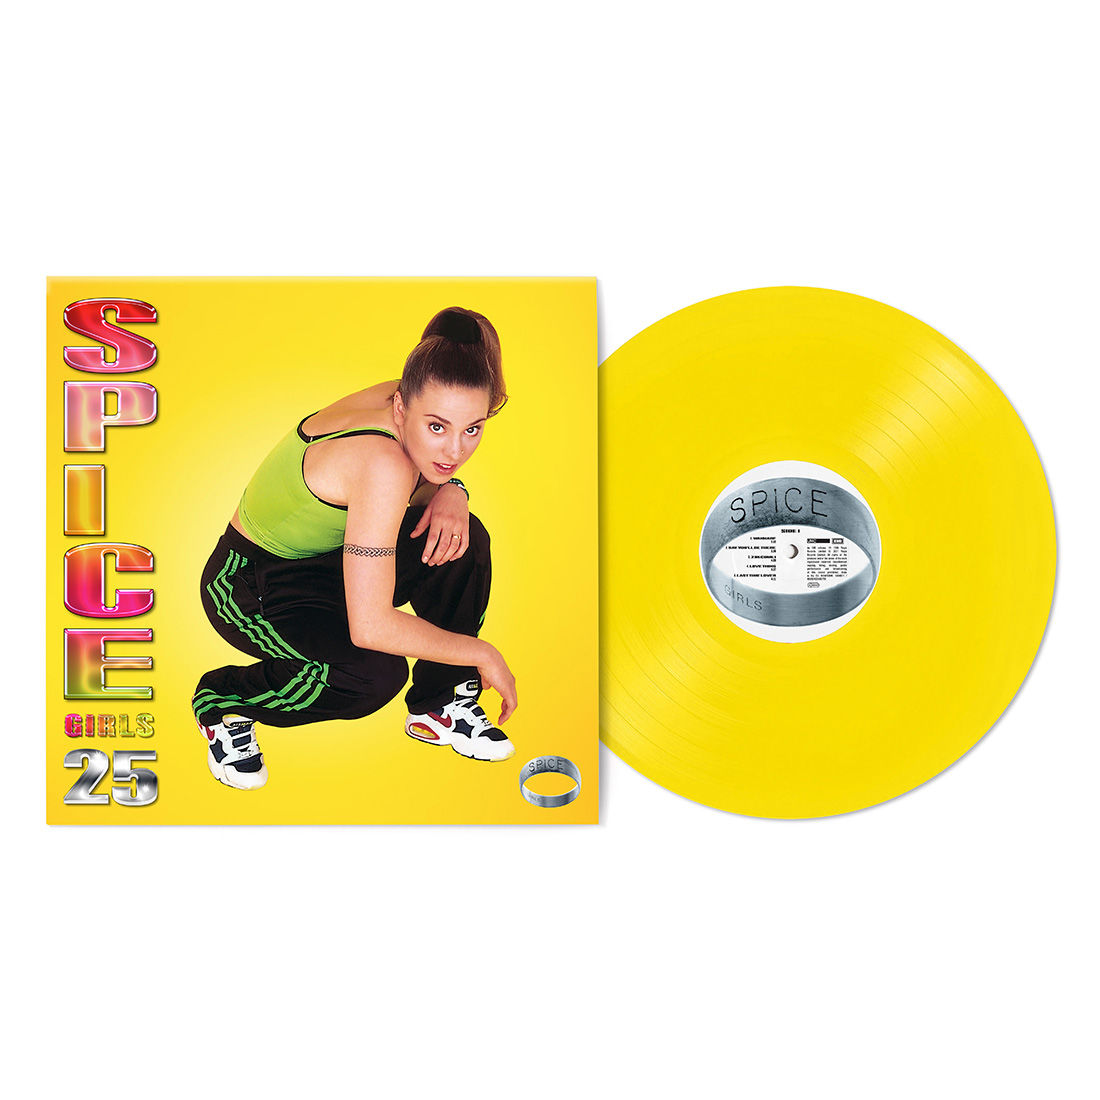 Spice Girls - Spice - 25th Anniversary: (‘Sporty’ Yellow Coloured) Vinyl LP